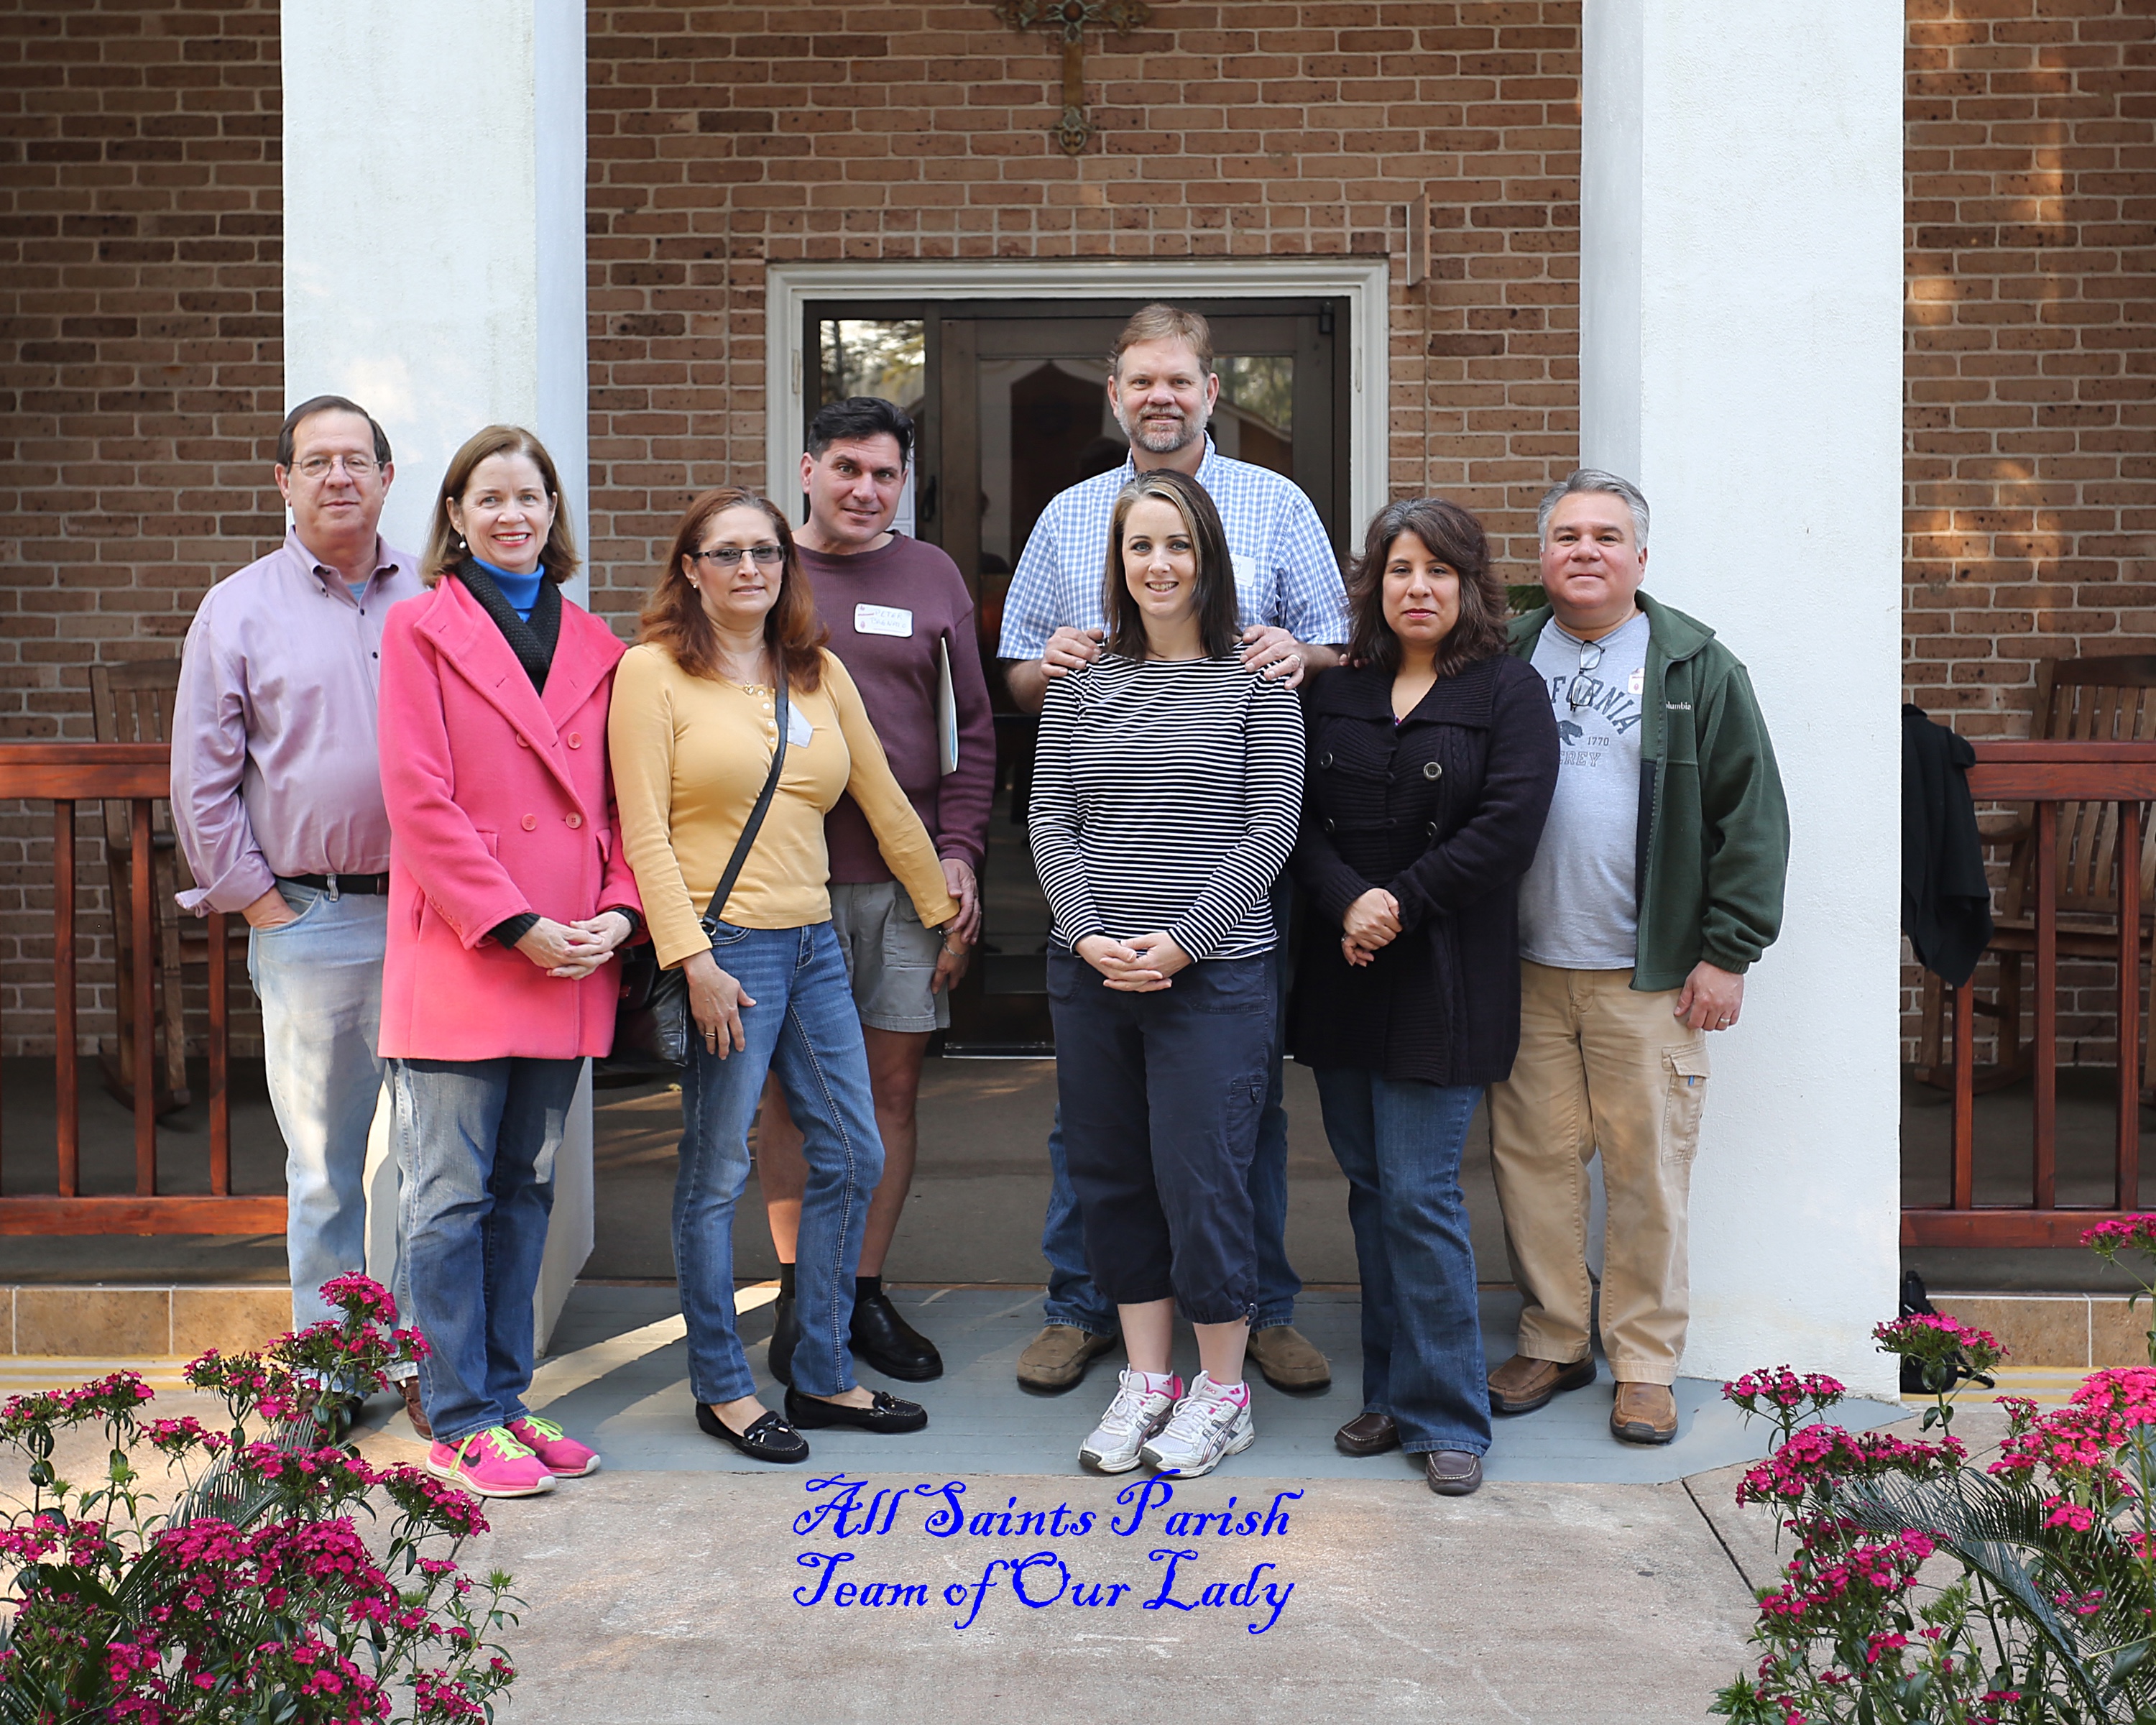 Married Couples Retreat, Feb. 13-15 2015-All Saints Parish, Team of Our Lady